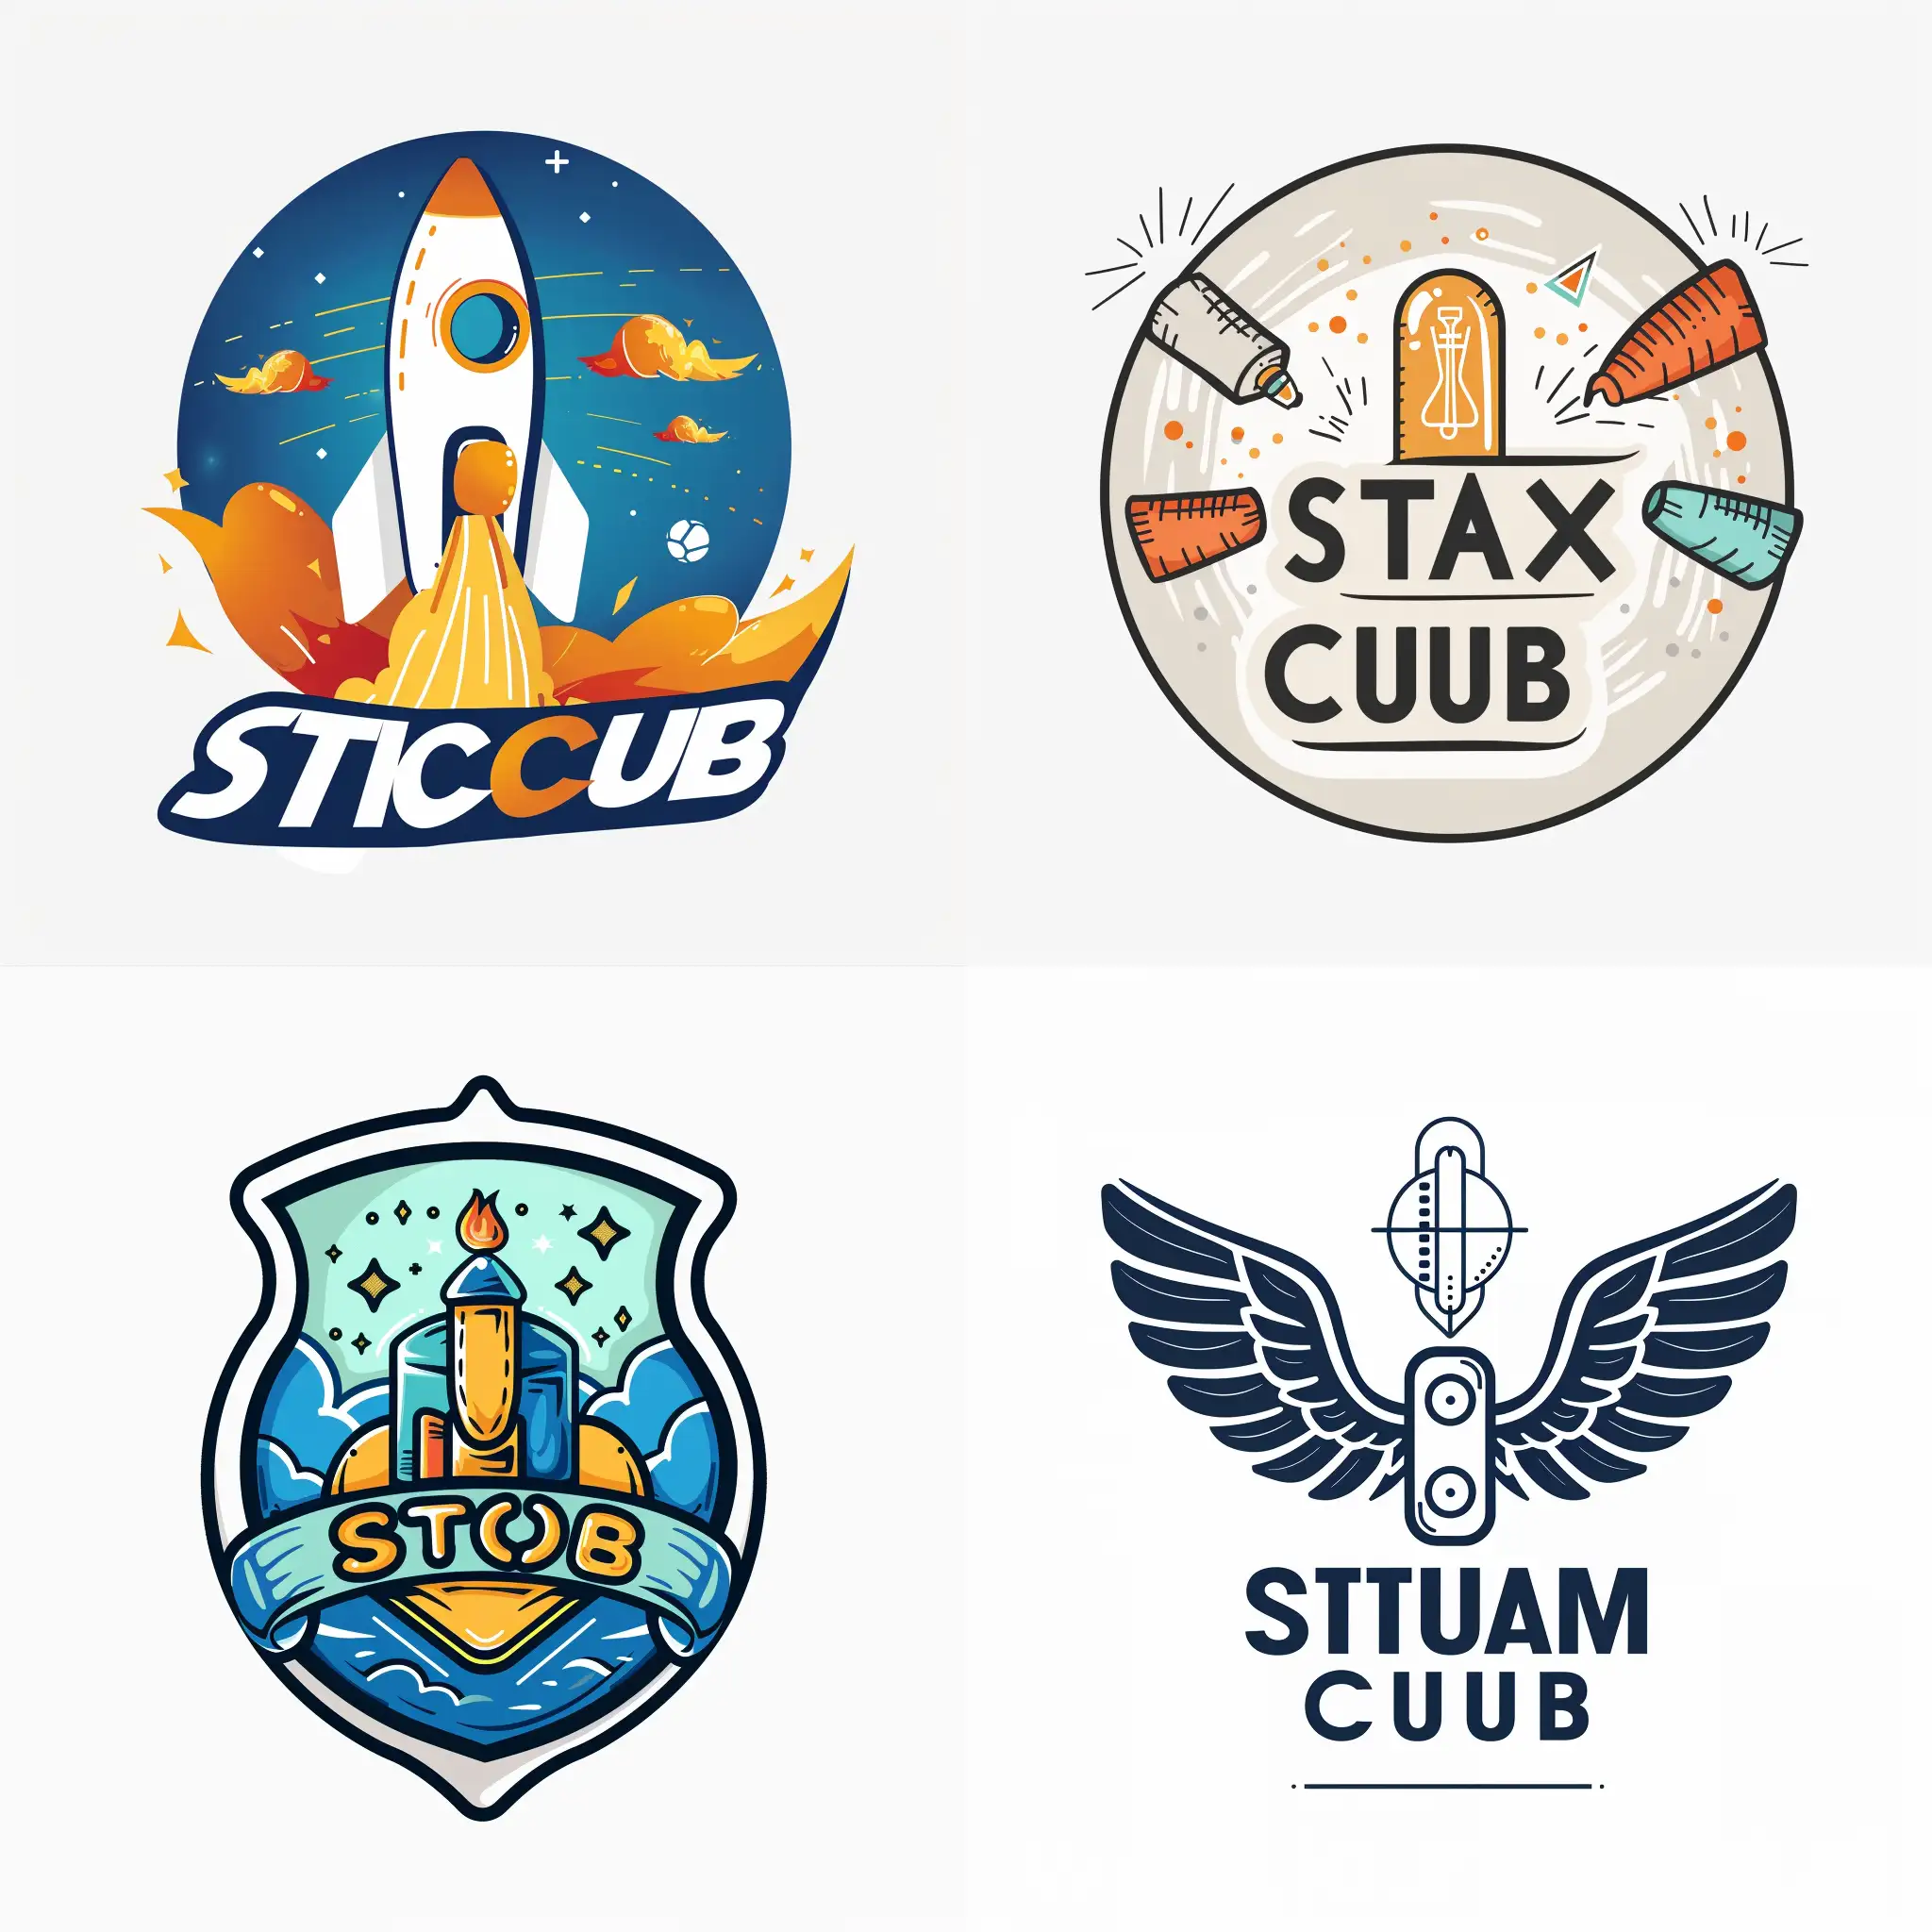 Creative-STEAM-Club-Logo-Design-with-Vibrant-Colors-and-Geometric-Elements